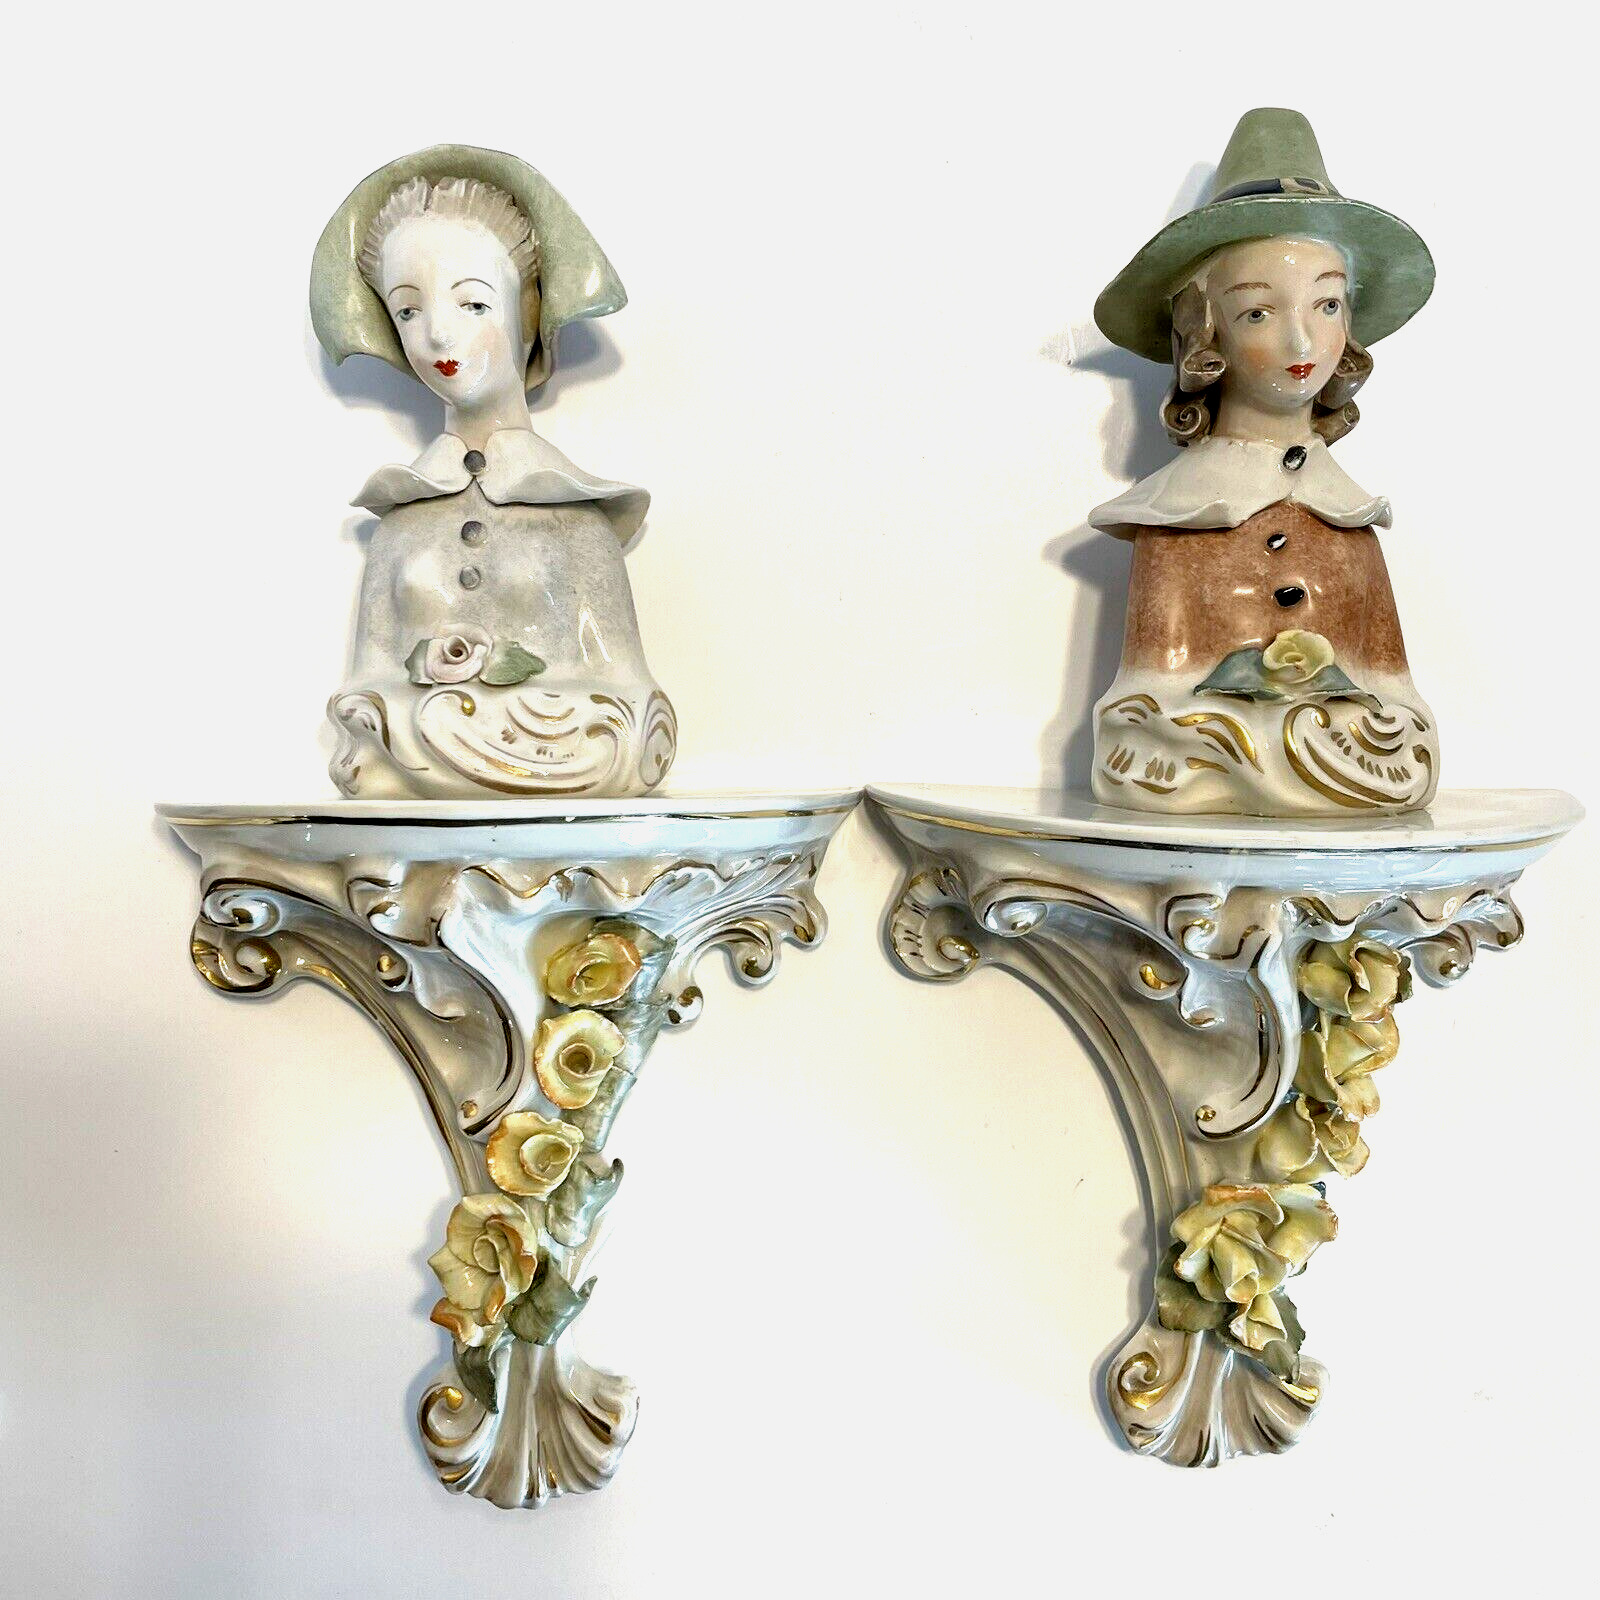 Pair of Vintage Cordey Ornate Porcelain Woman & Man Bust Figure Wall Hang Sconce